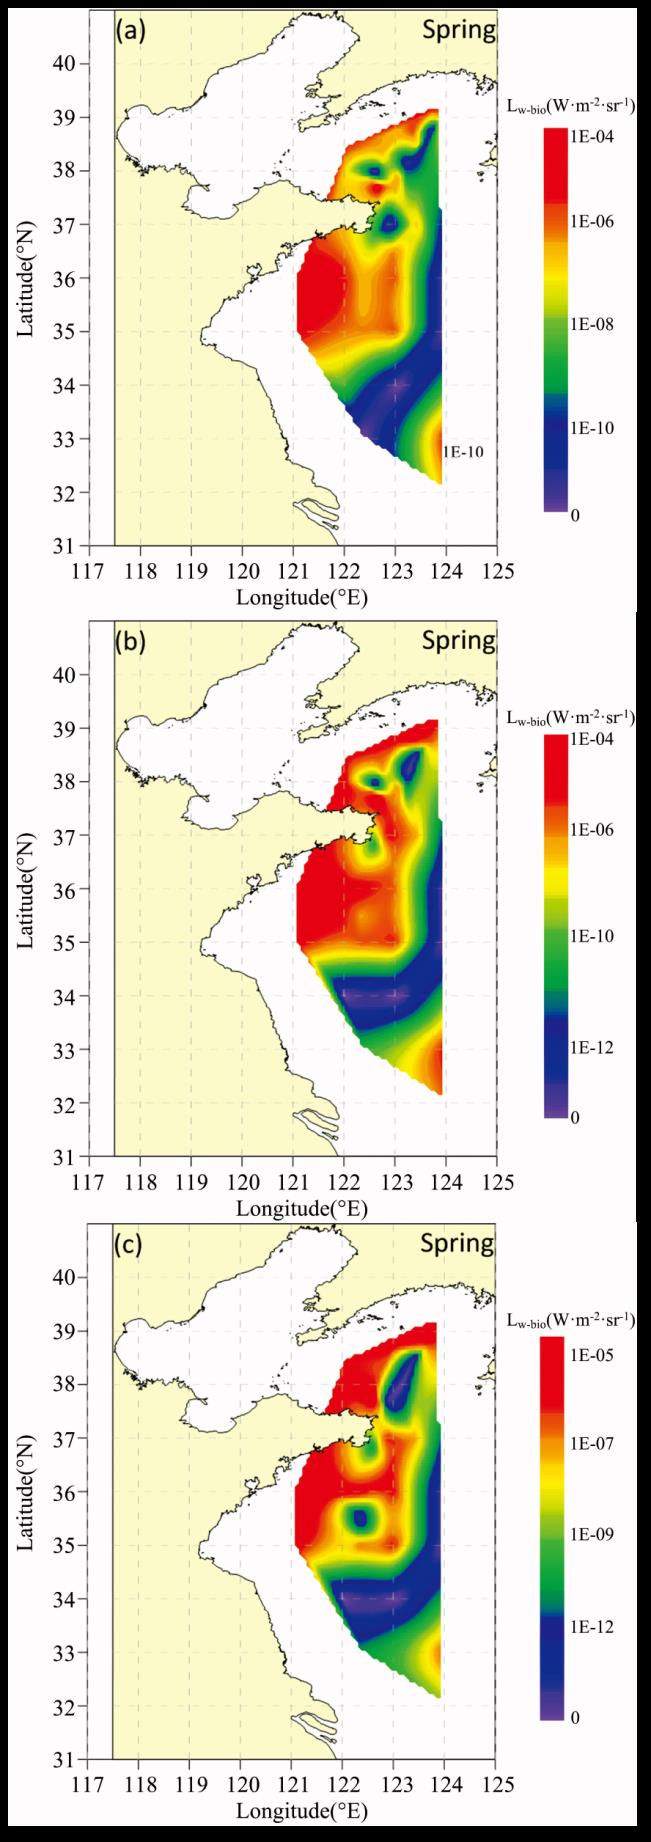 The spatial distribution of Lw-bio at bioluminescence source depths of 4 m (a), 8 m (b) and 15 m (c) in the Yellow Sea during spring